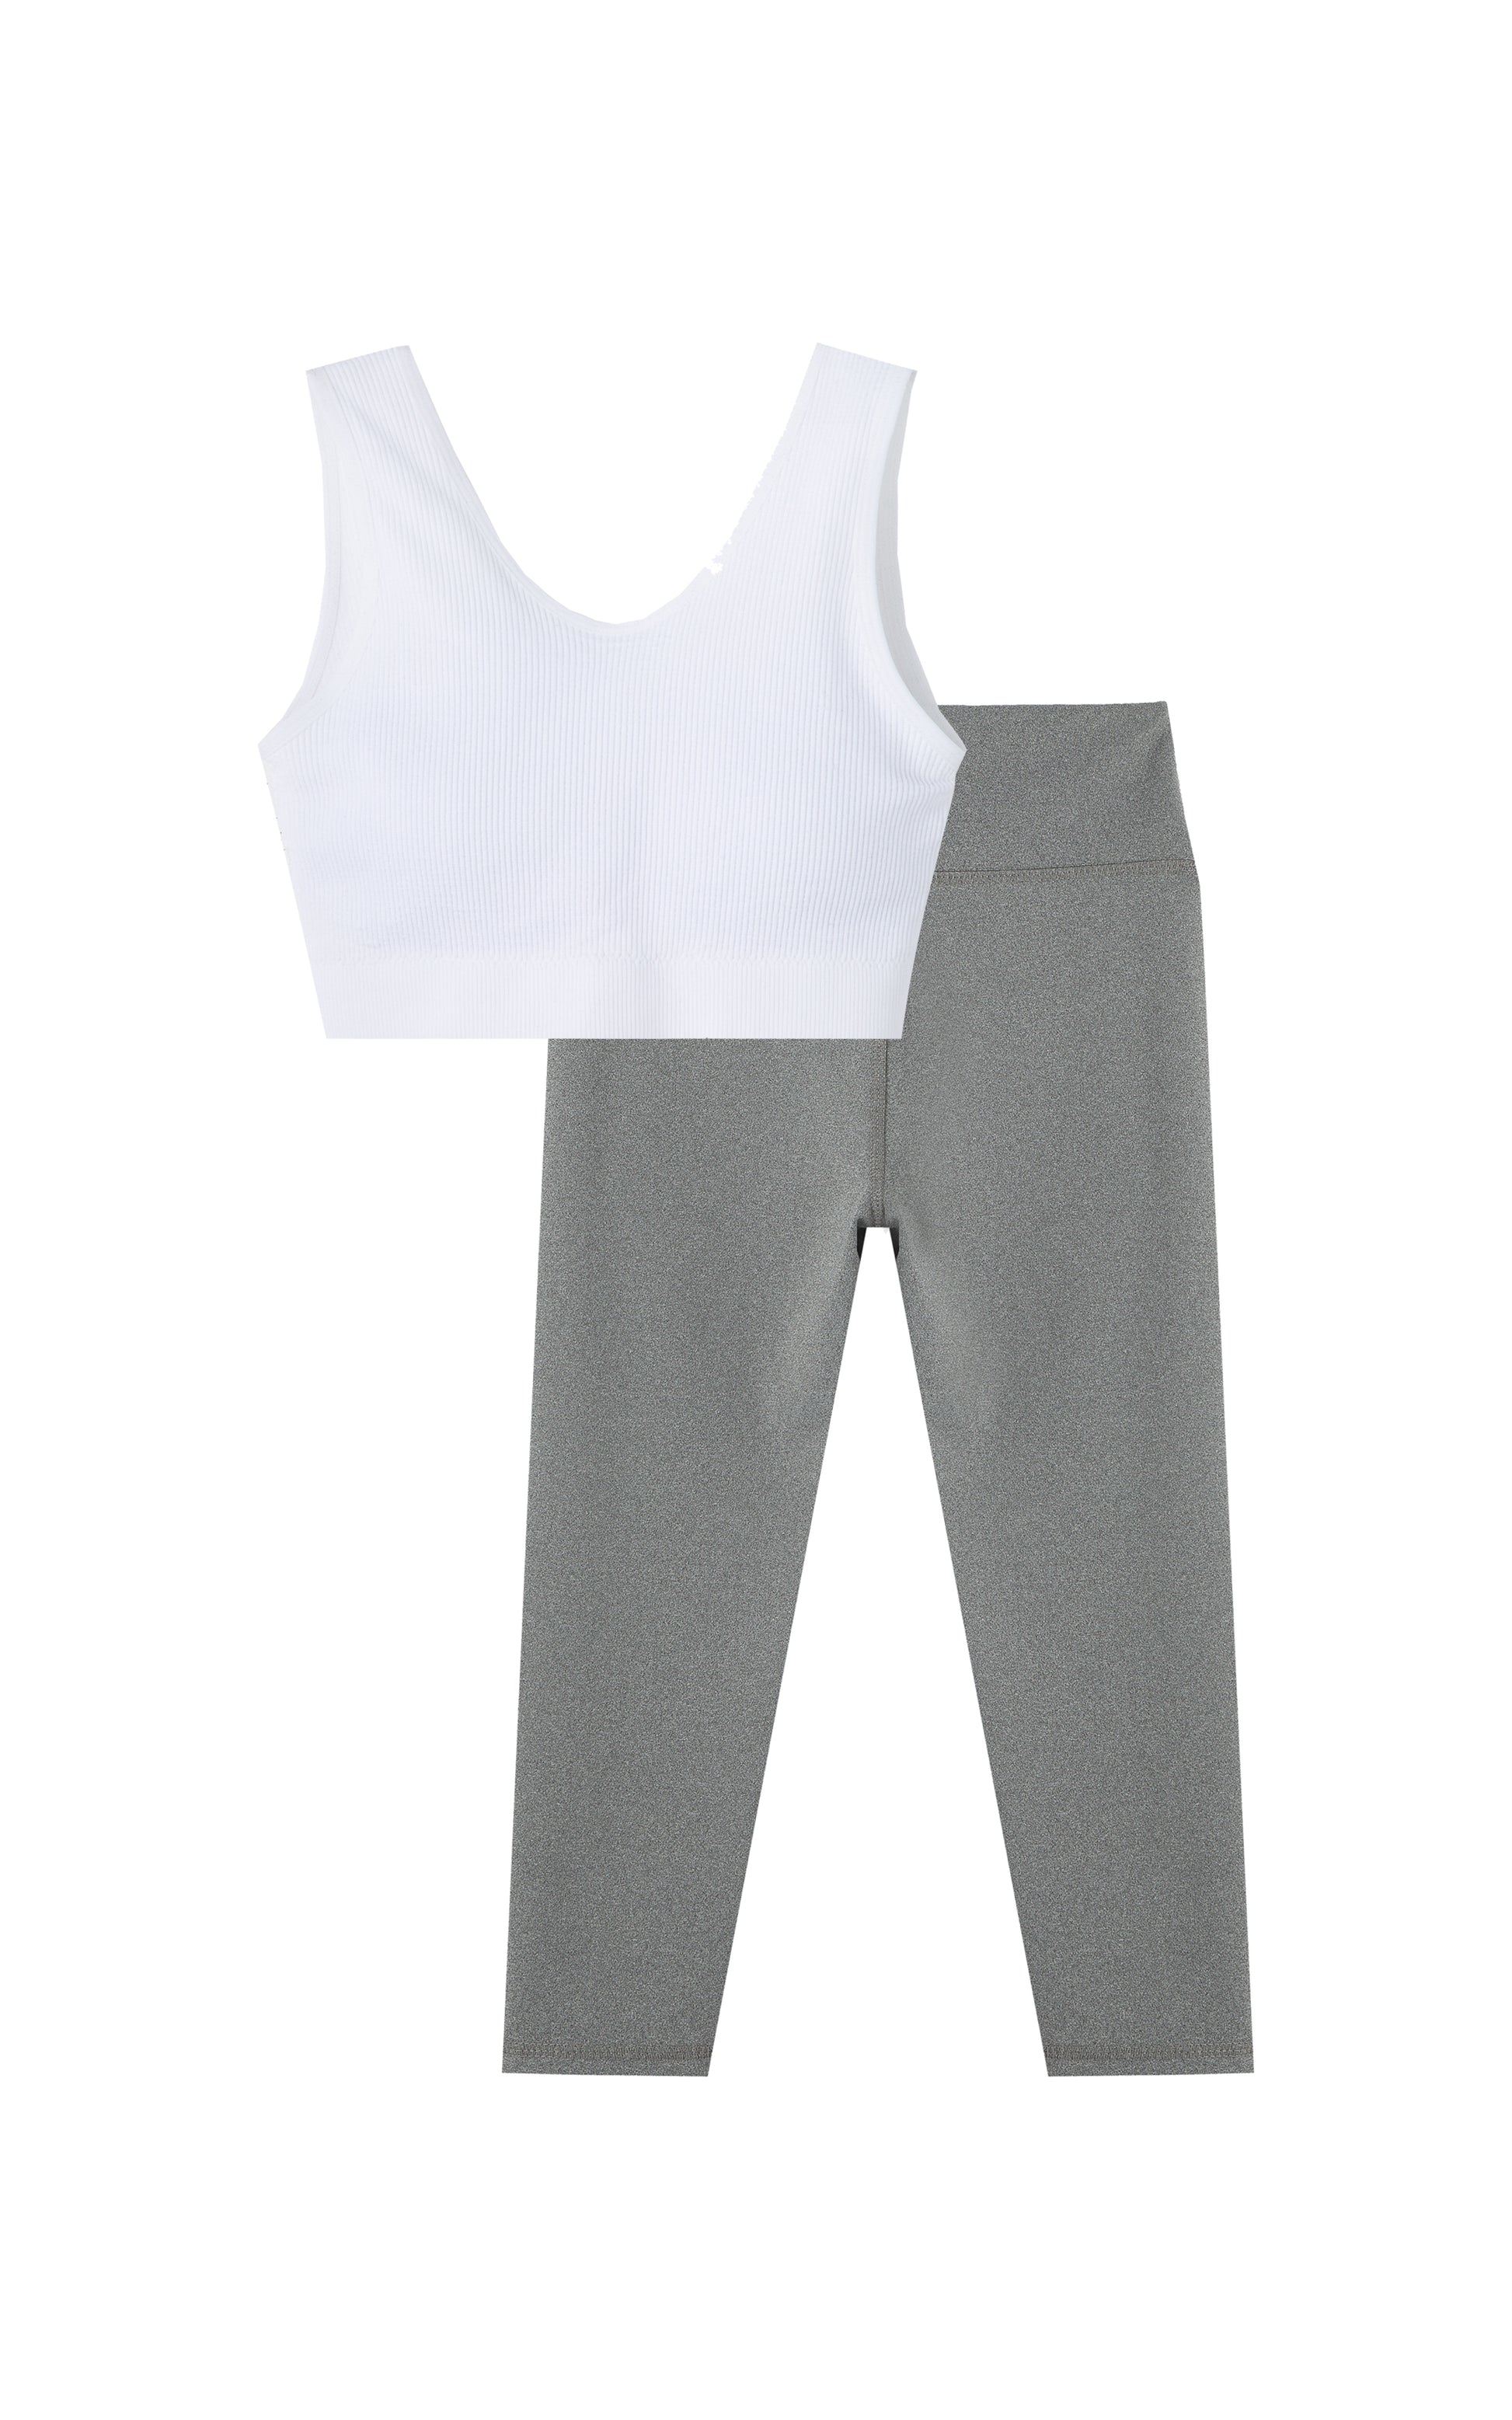 WHITE RIBBED CROP TOP SPORTS BRA AND GREY LEGGINGS